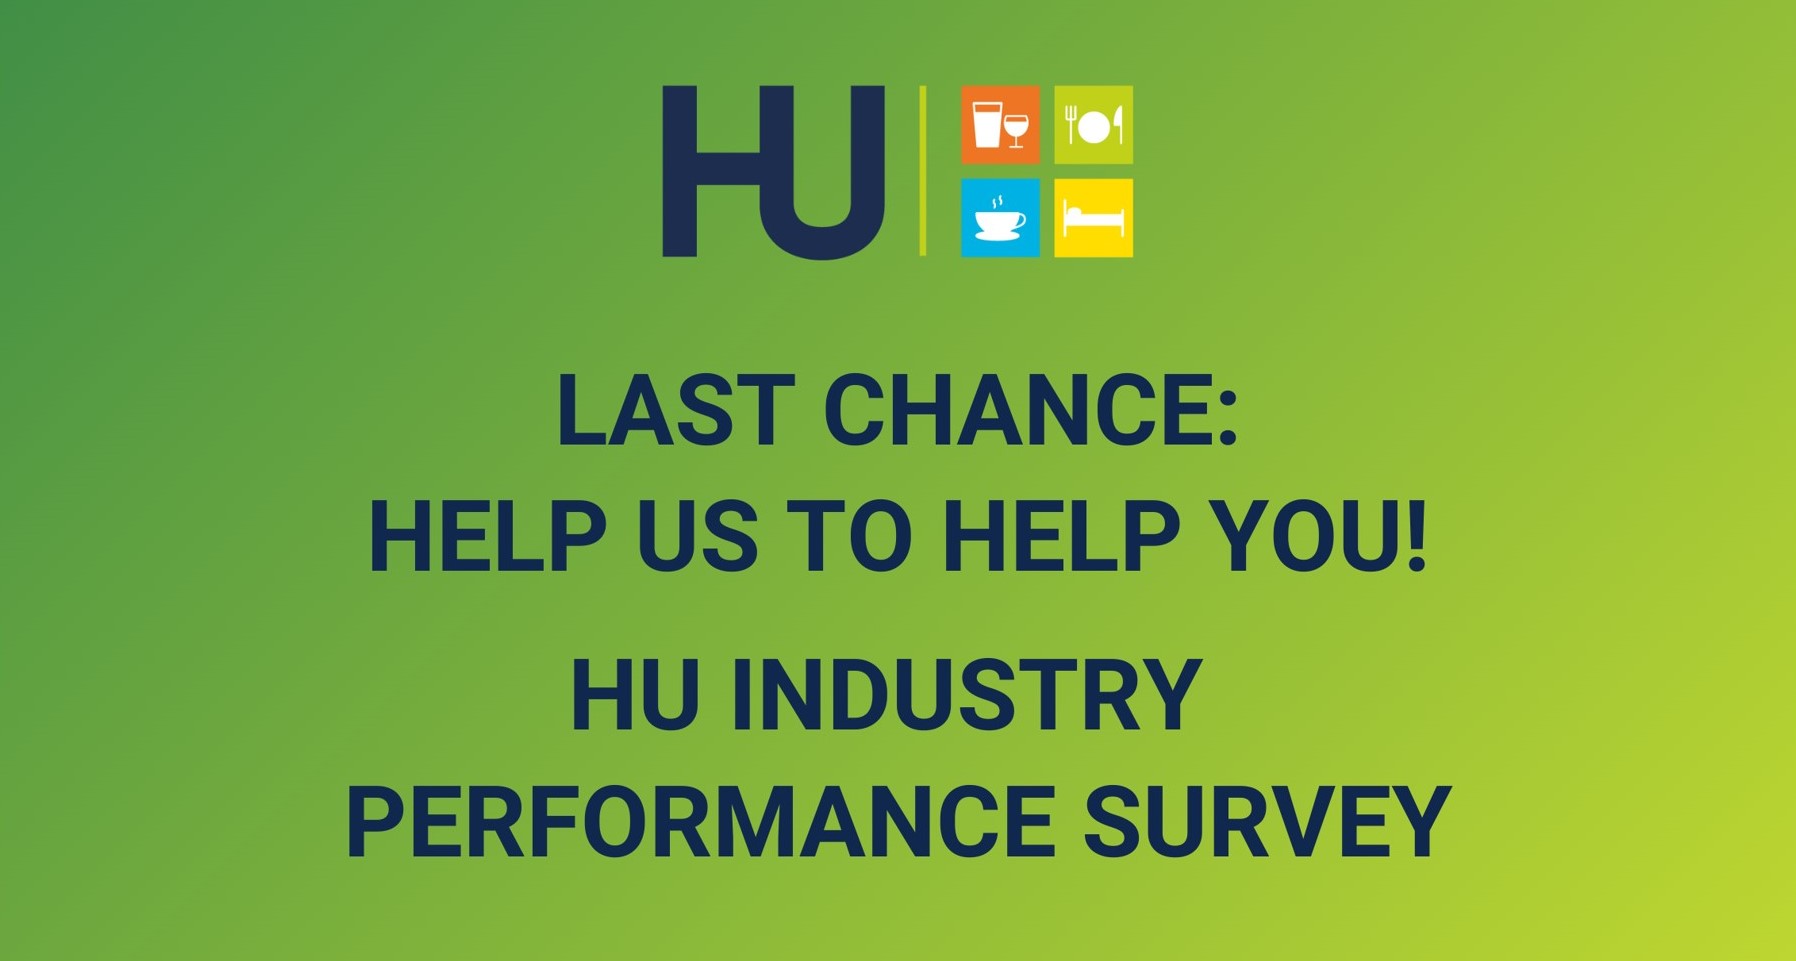 LAST CHANCE - HELP US TO HELP YOU - HU INDUSTRY PERFORMANCE SURVEY